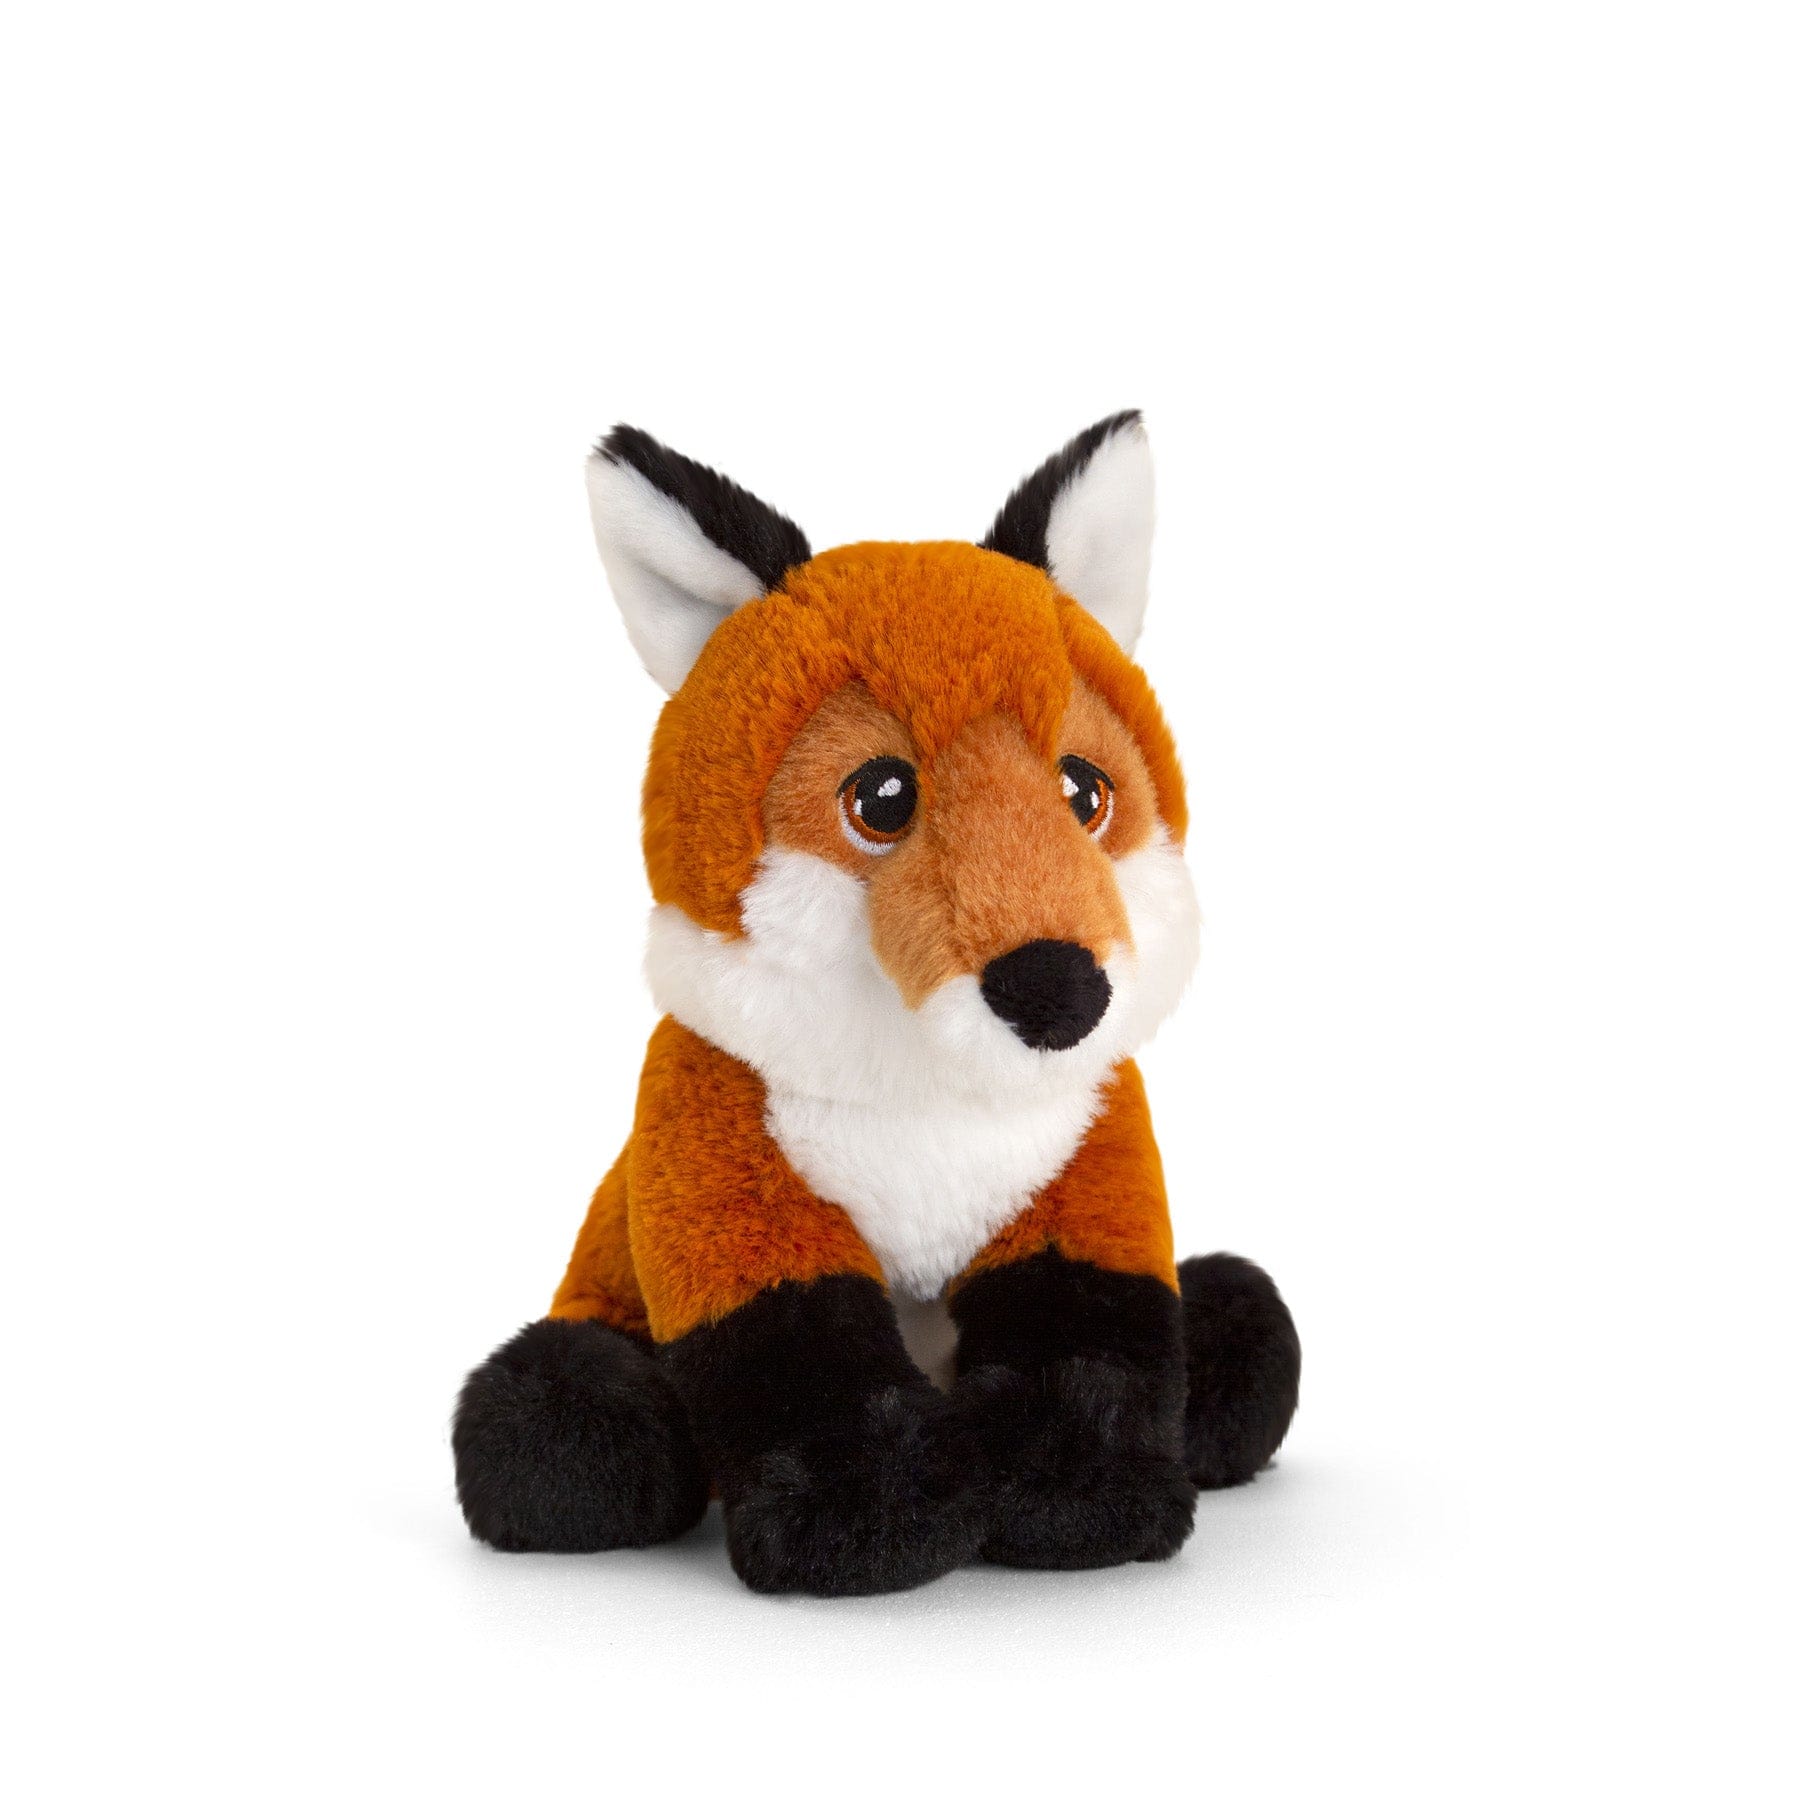 Plush fox toy, cute stuffed animal, soft toy fox, fluffy orange and black fox, children's toy, isolated on white background.